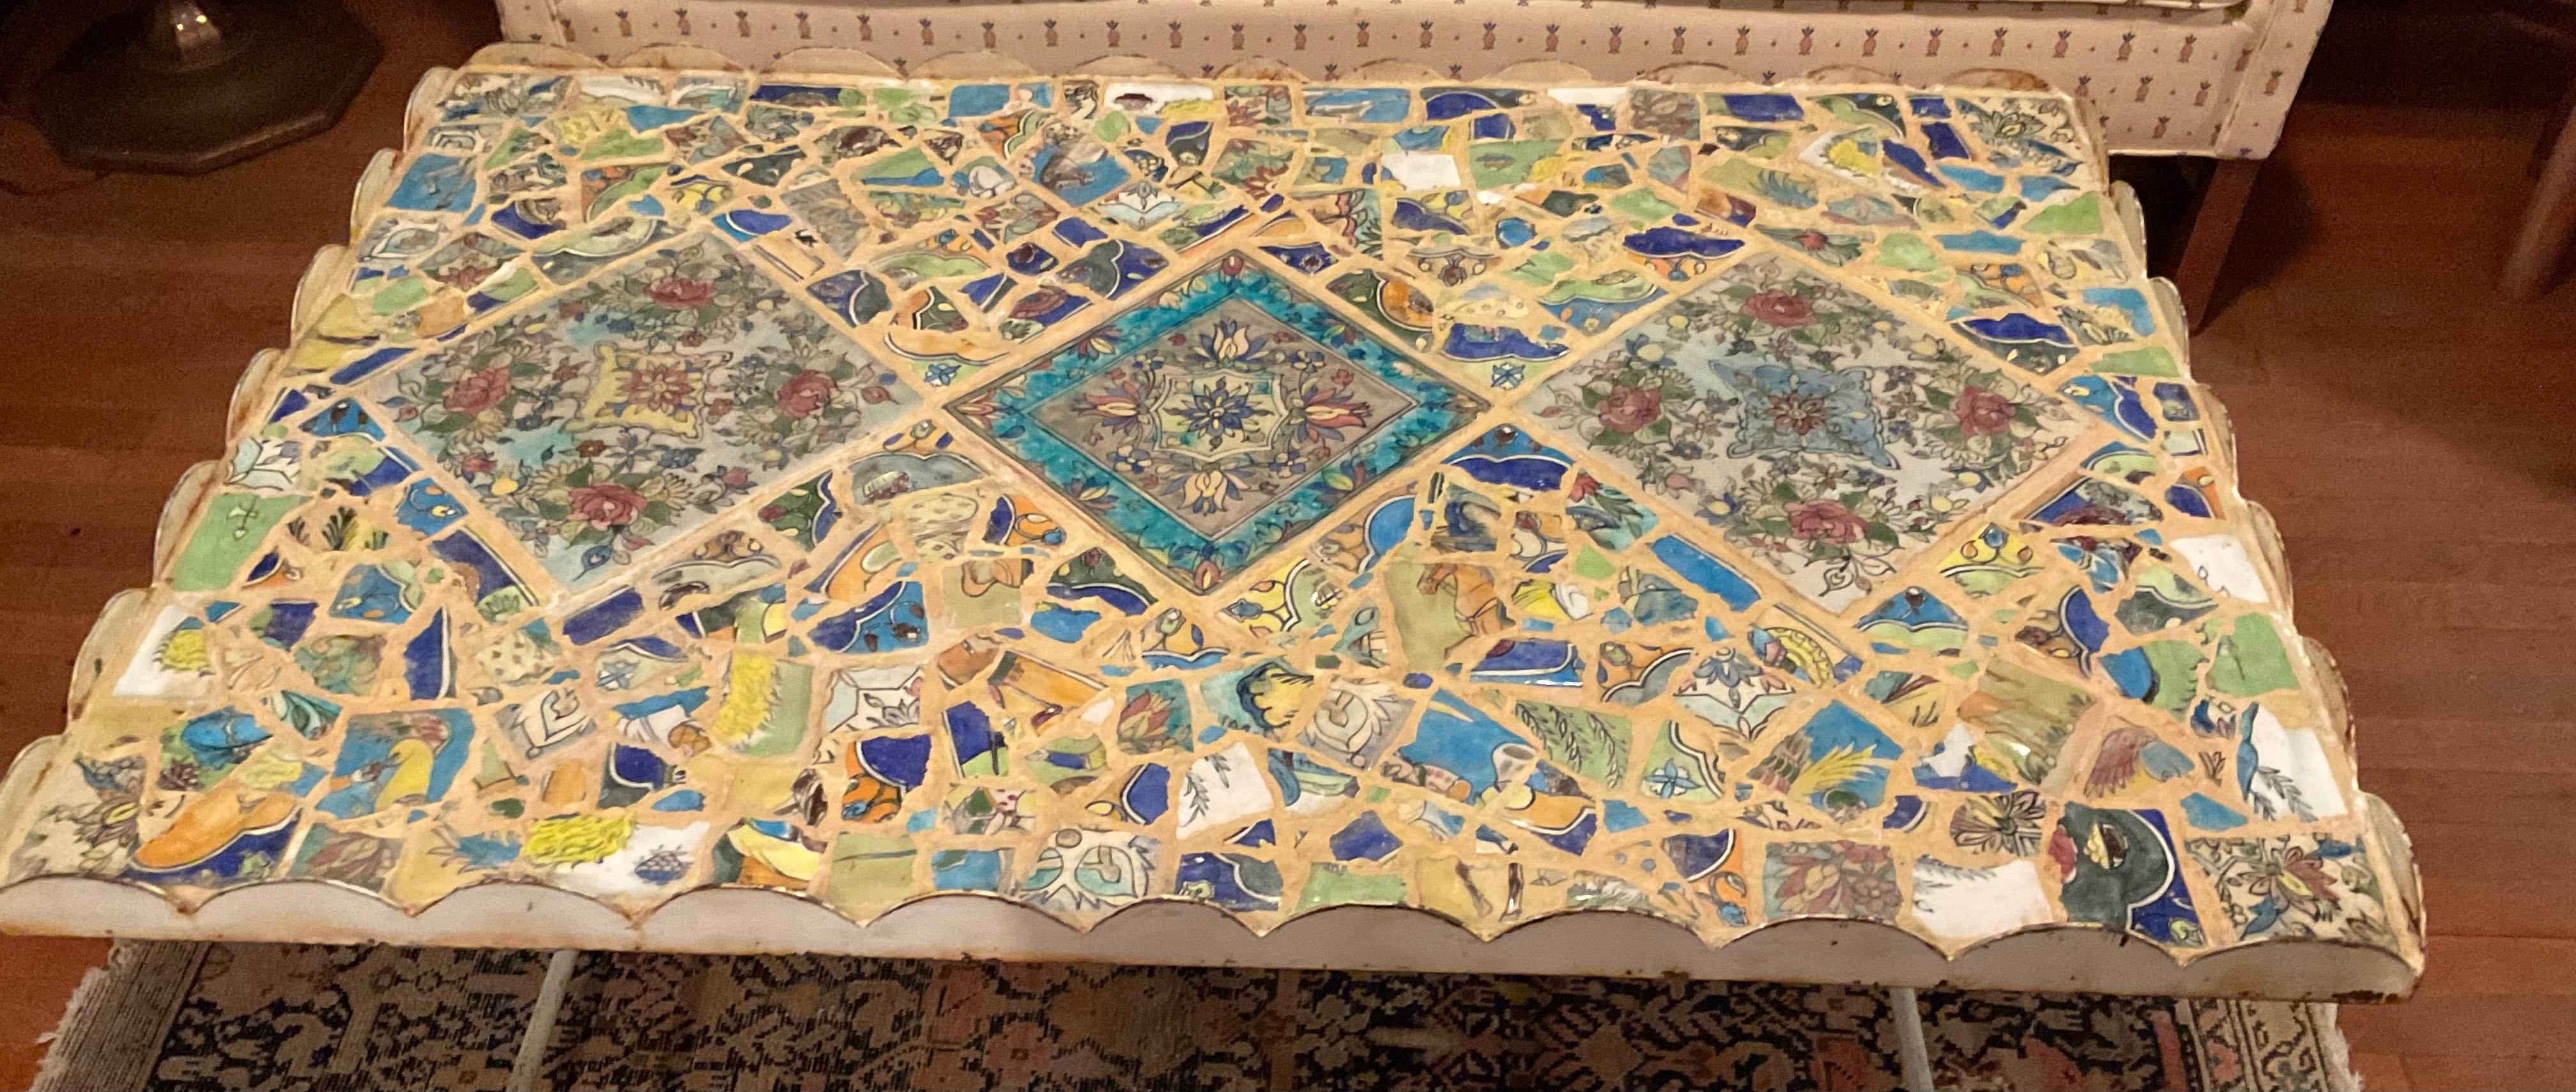 One of a Kind Iron Persian Tile Coffee Table, by Joseph Malekan For Sale 12